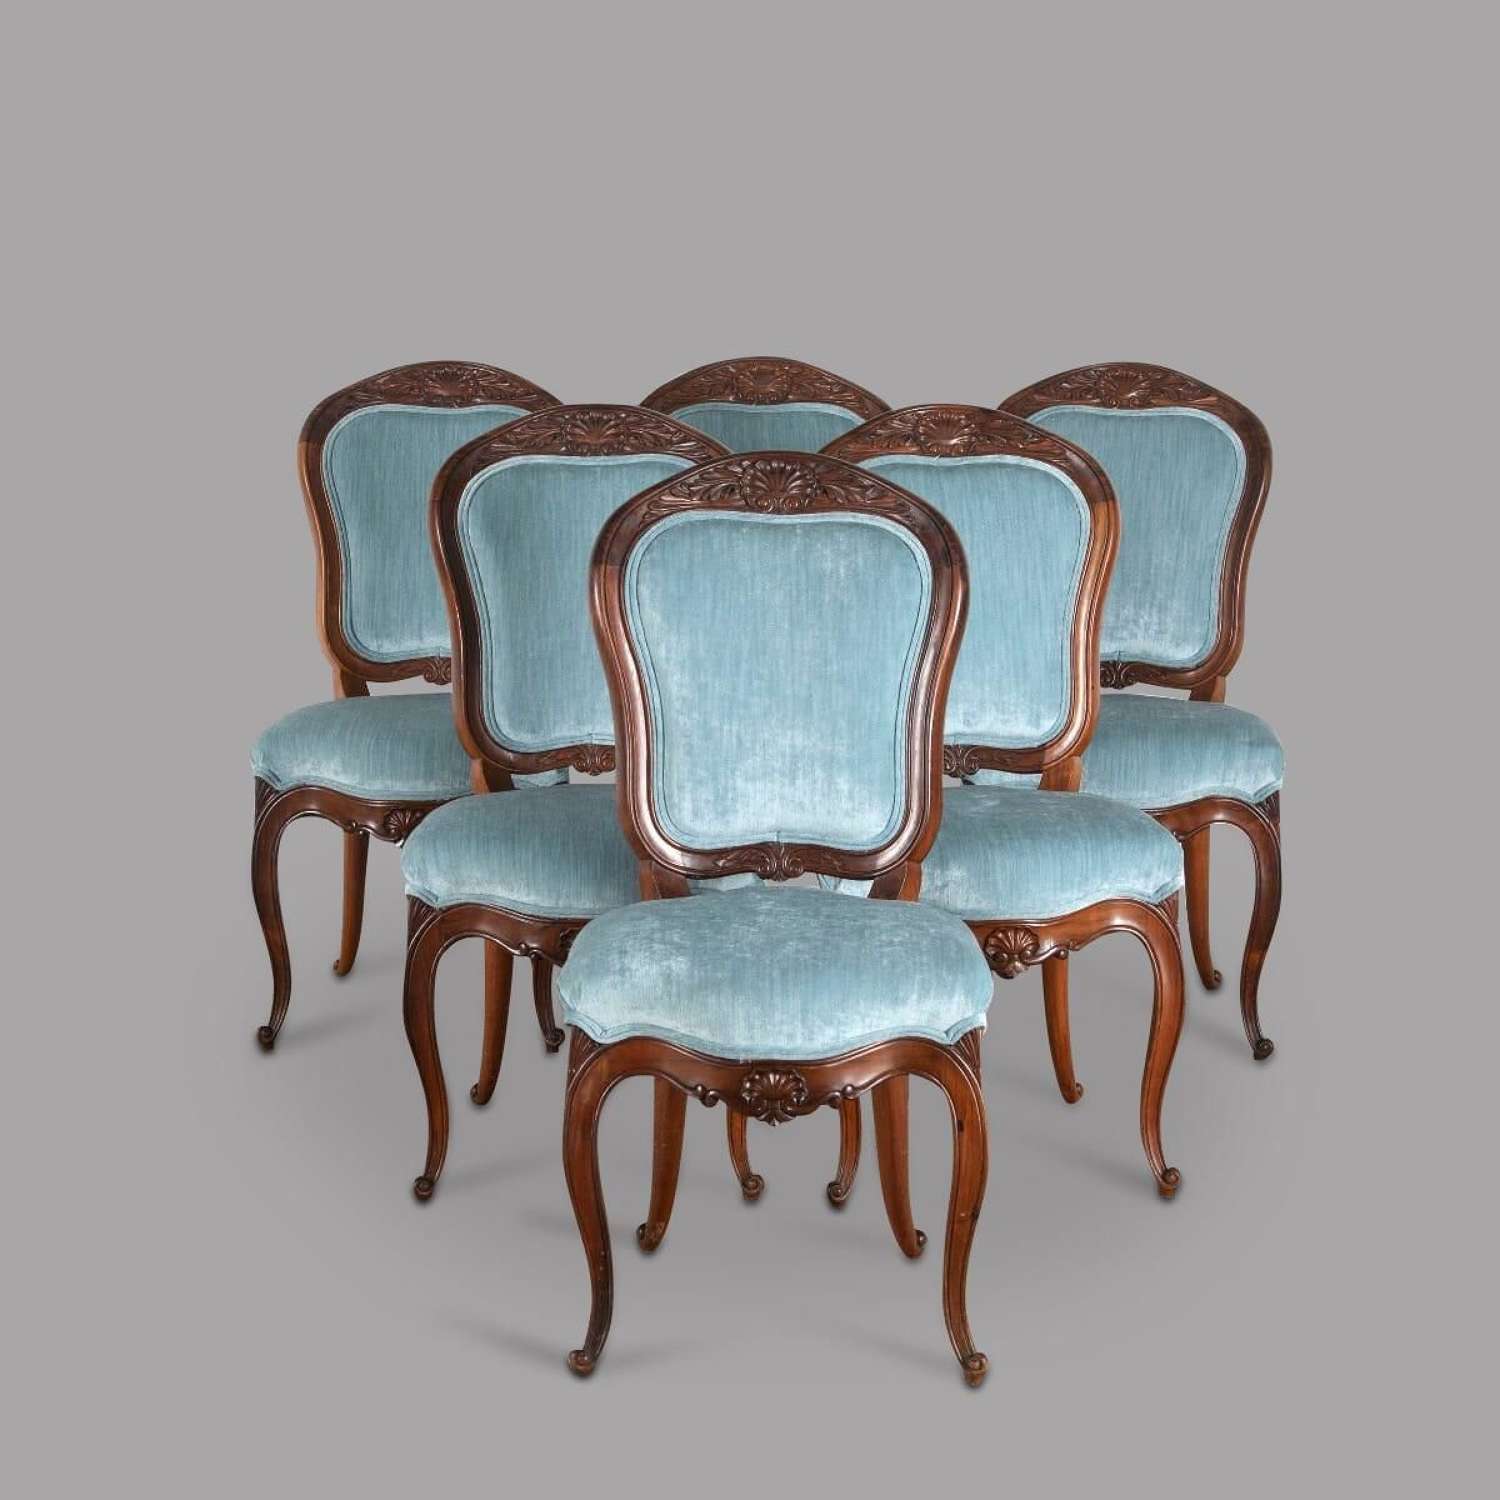 A Set of Six English Rosewood Dining Chairs